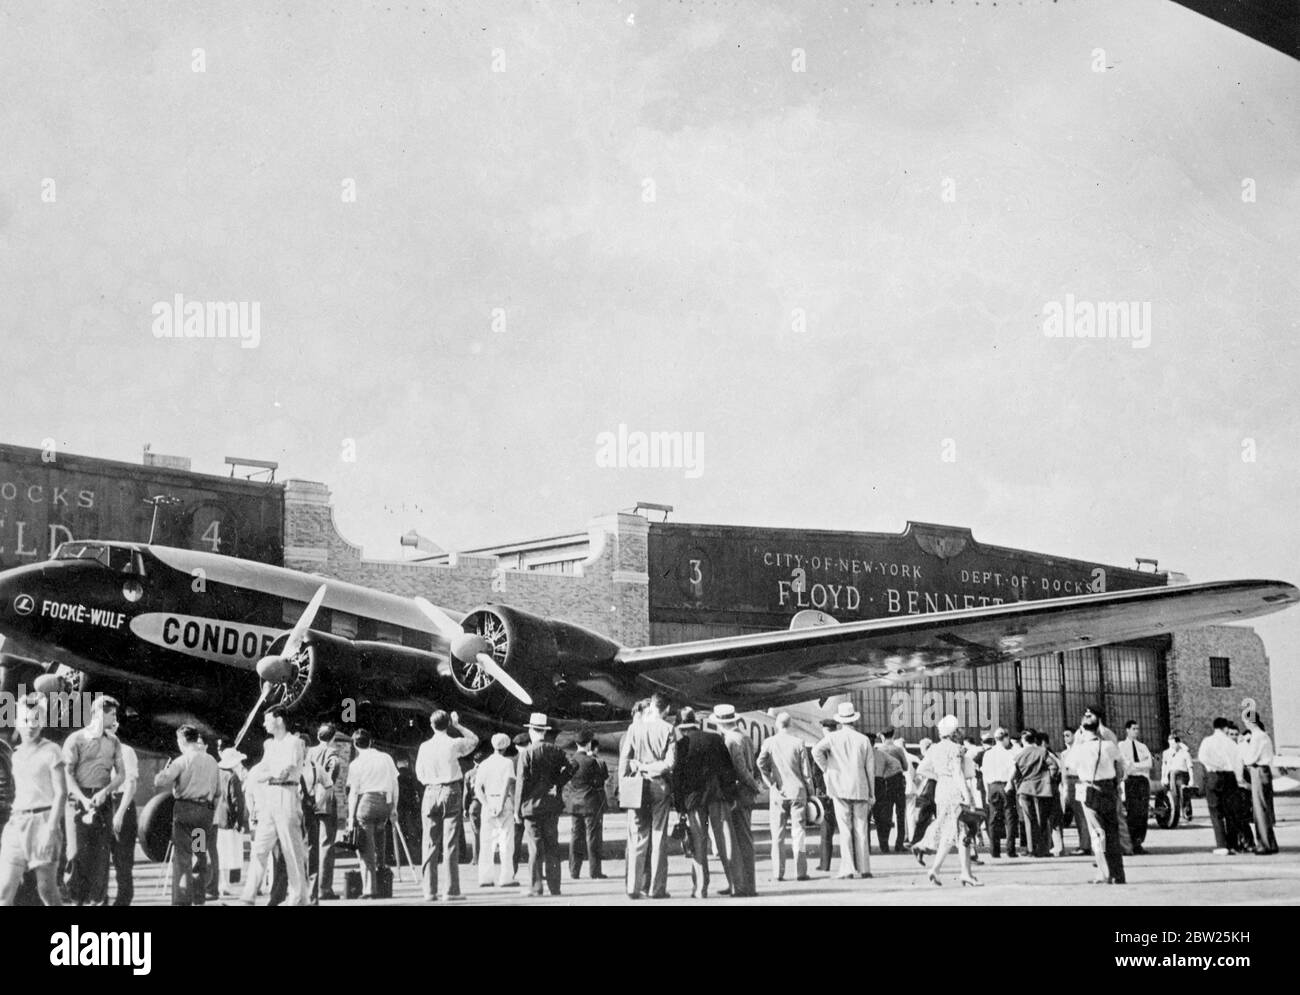 German transatlantic plane brings back pictures of own arrival in New York. These pictures, showing the arrival of the German Focke-Wulf Fw 200 Condorr 'Brandenburg' at Floyd Bennett Field, New York, after her secret first direct non-stop flight from Berlin across the Atlantic, were brought back to Europe by the machine on her return flight. The plane, piloted by captain Alfred Hencke, breached New York in just under 25 hours, and flew back in a few minutes under 20 hours, a record. Photo shows, the 'Brandenburg' on arrival at Floyd Bennett field, New York.. 15 August 1938 Stock Photo